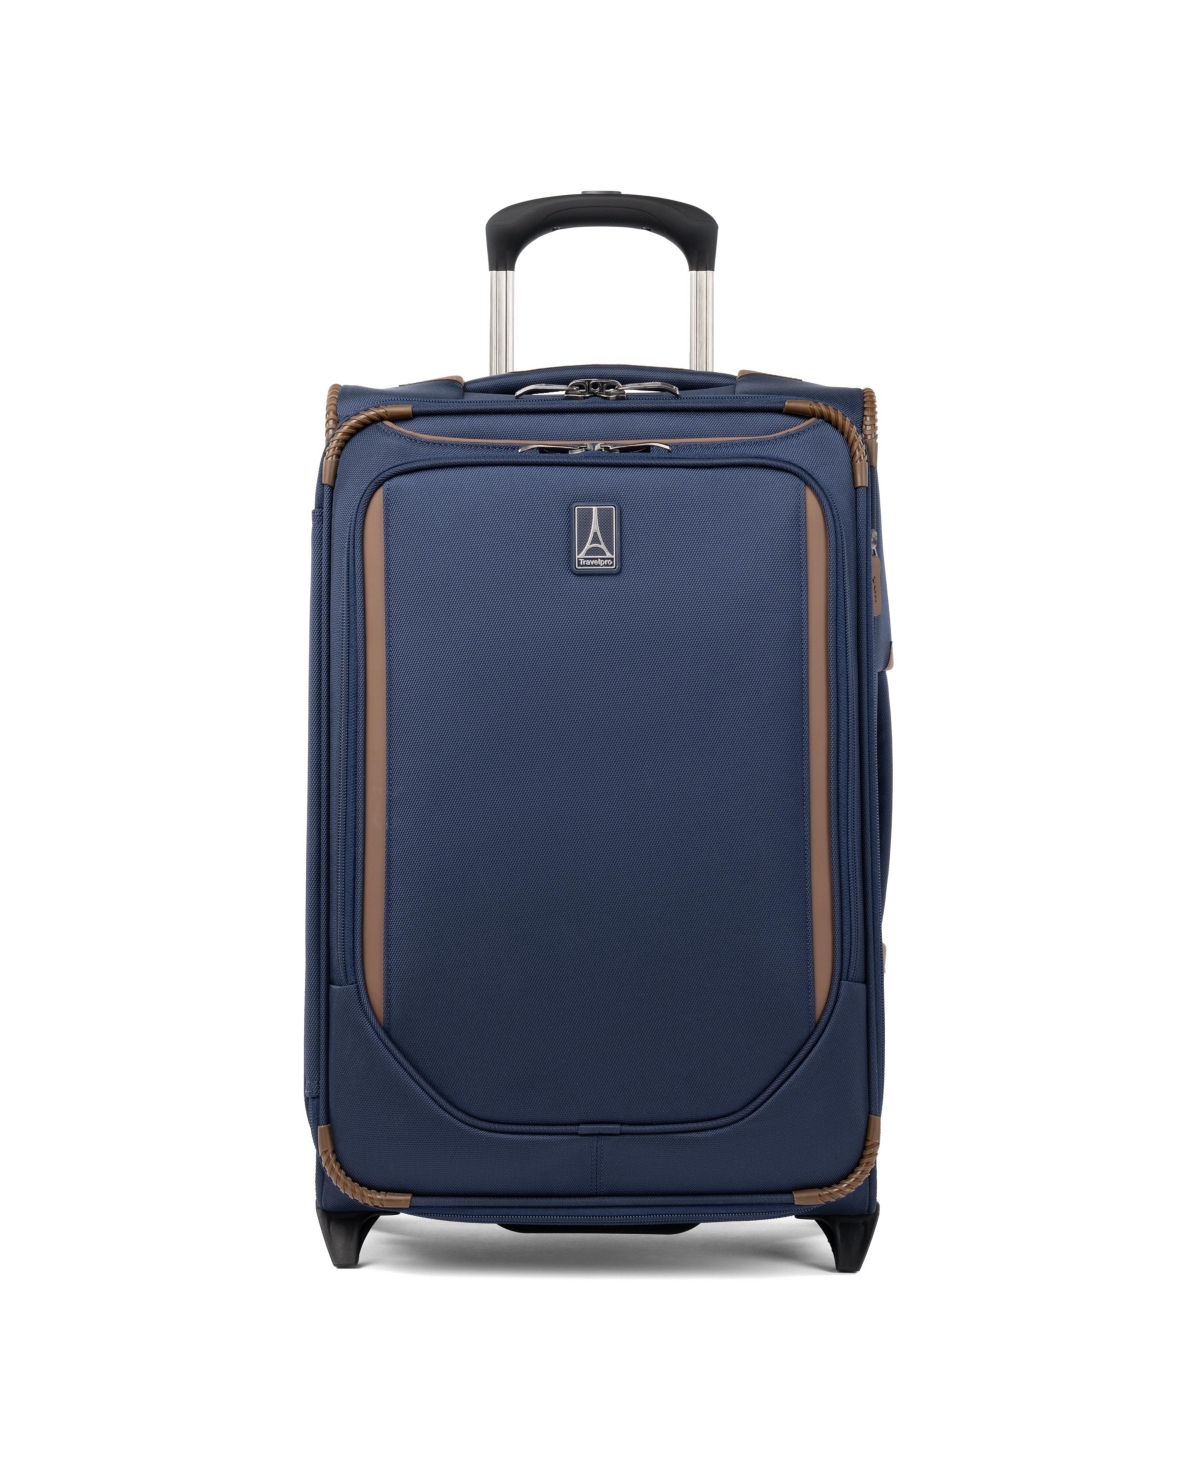 New! Travelpro Crew Classic Carry-on Expandable Rollaboard Luggage - Patriot Blue